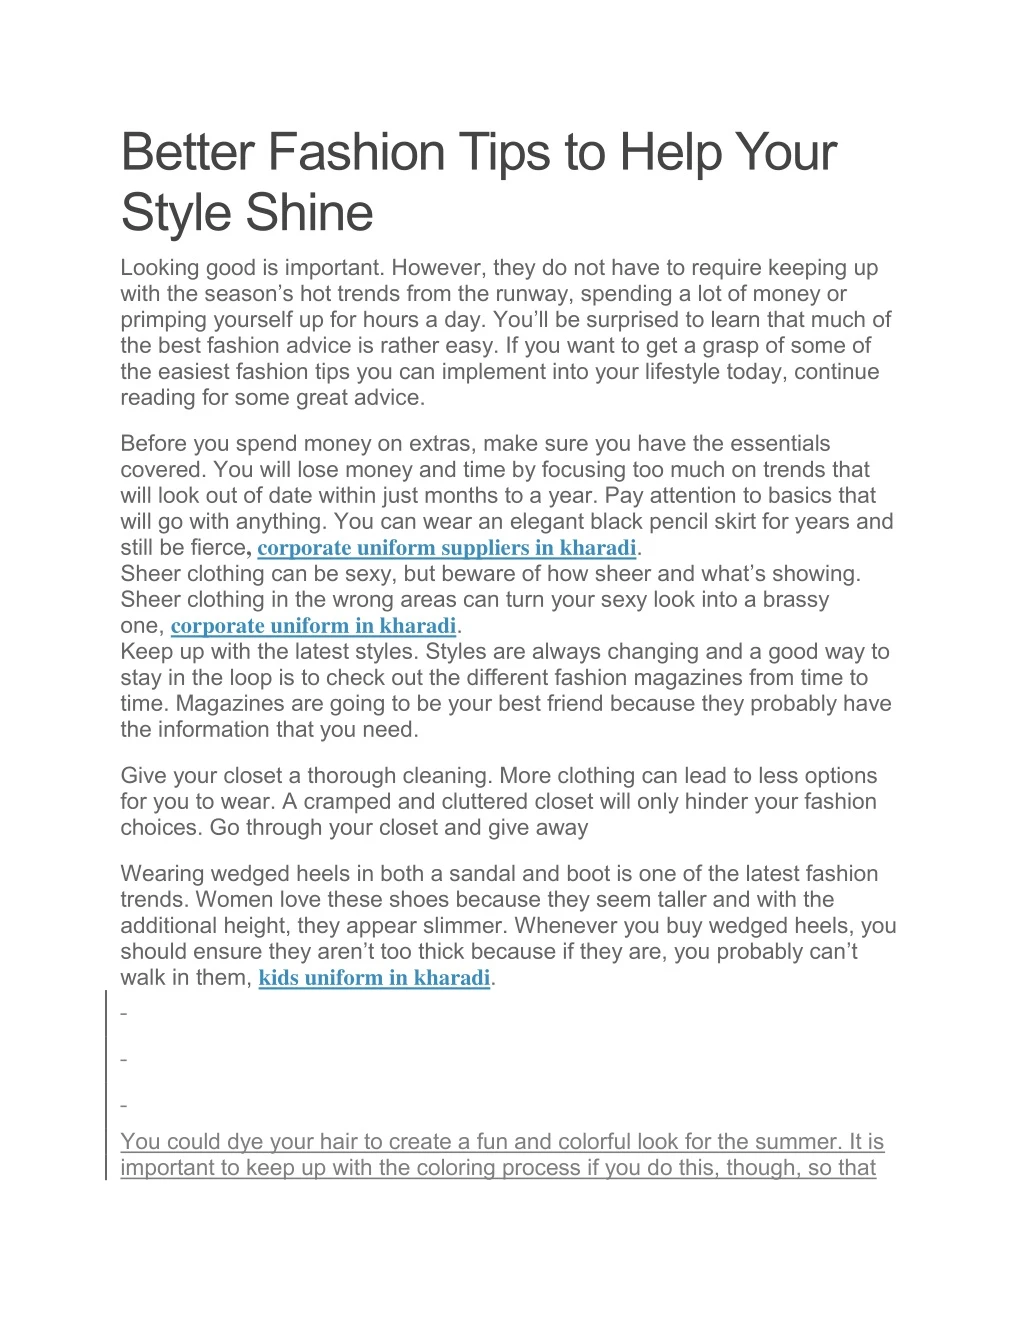 better fashion tips to help your style shine